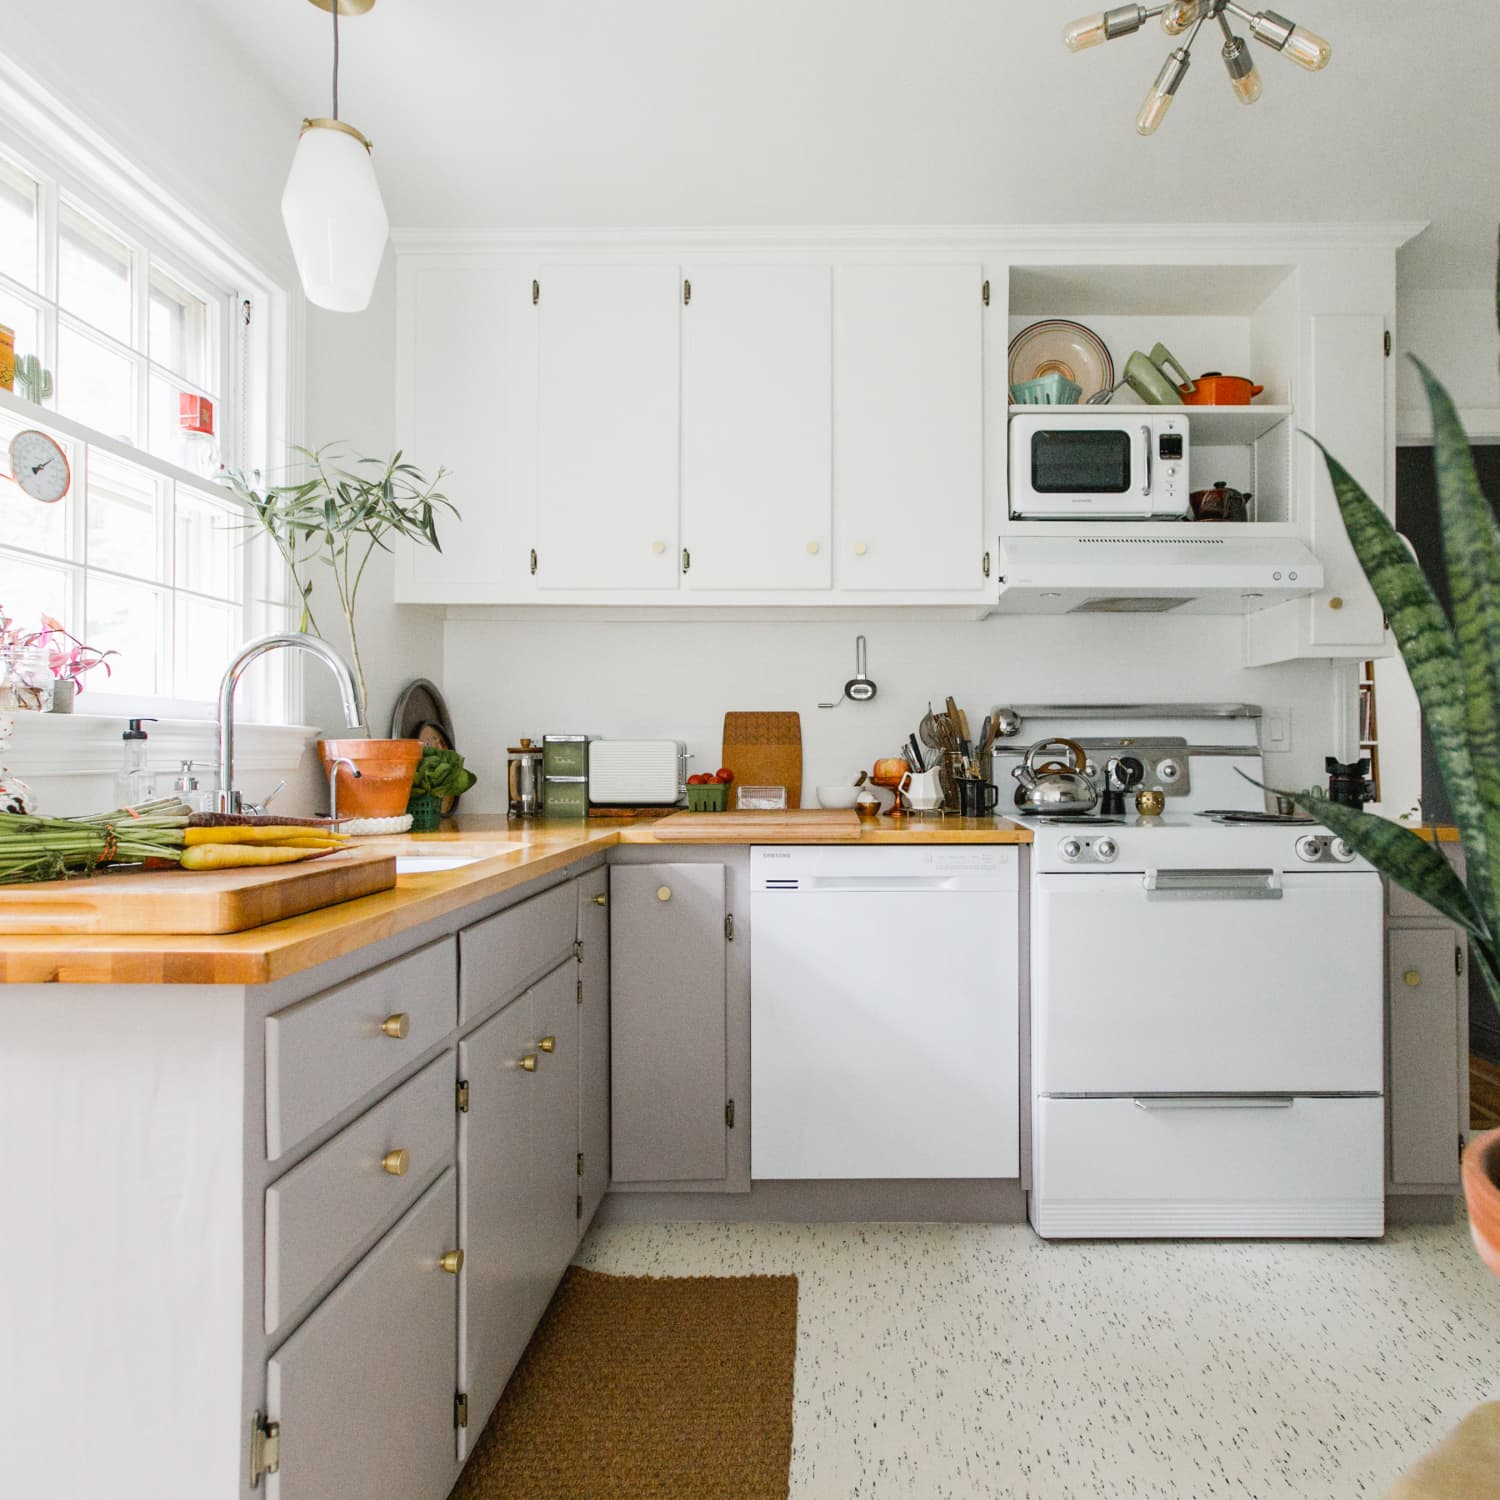 Kitchen Decorating Trends to Avoid   20   Kitchn